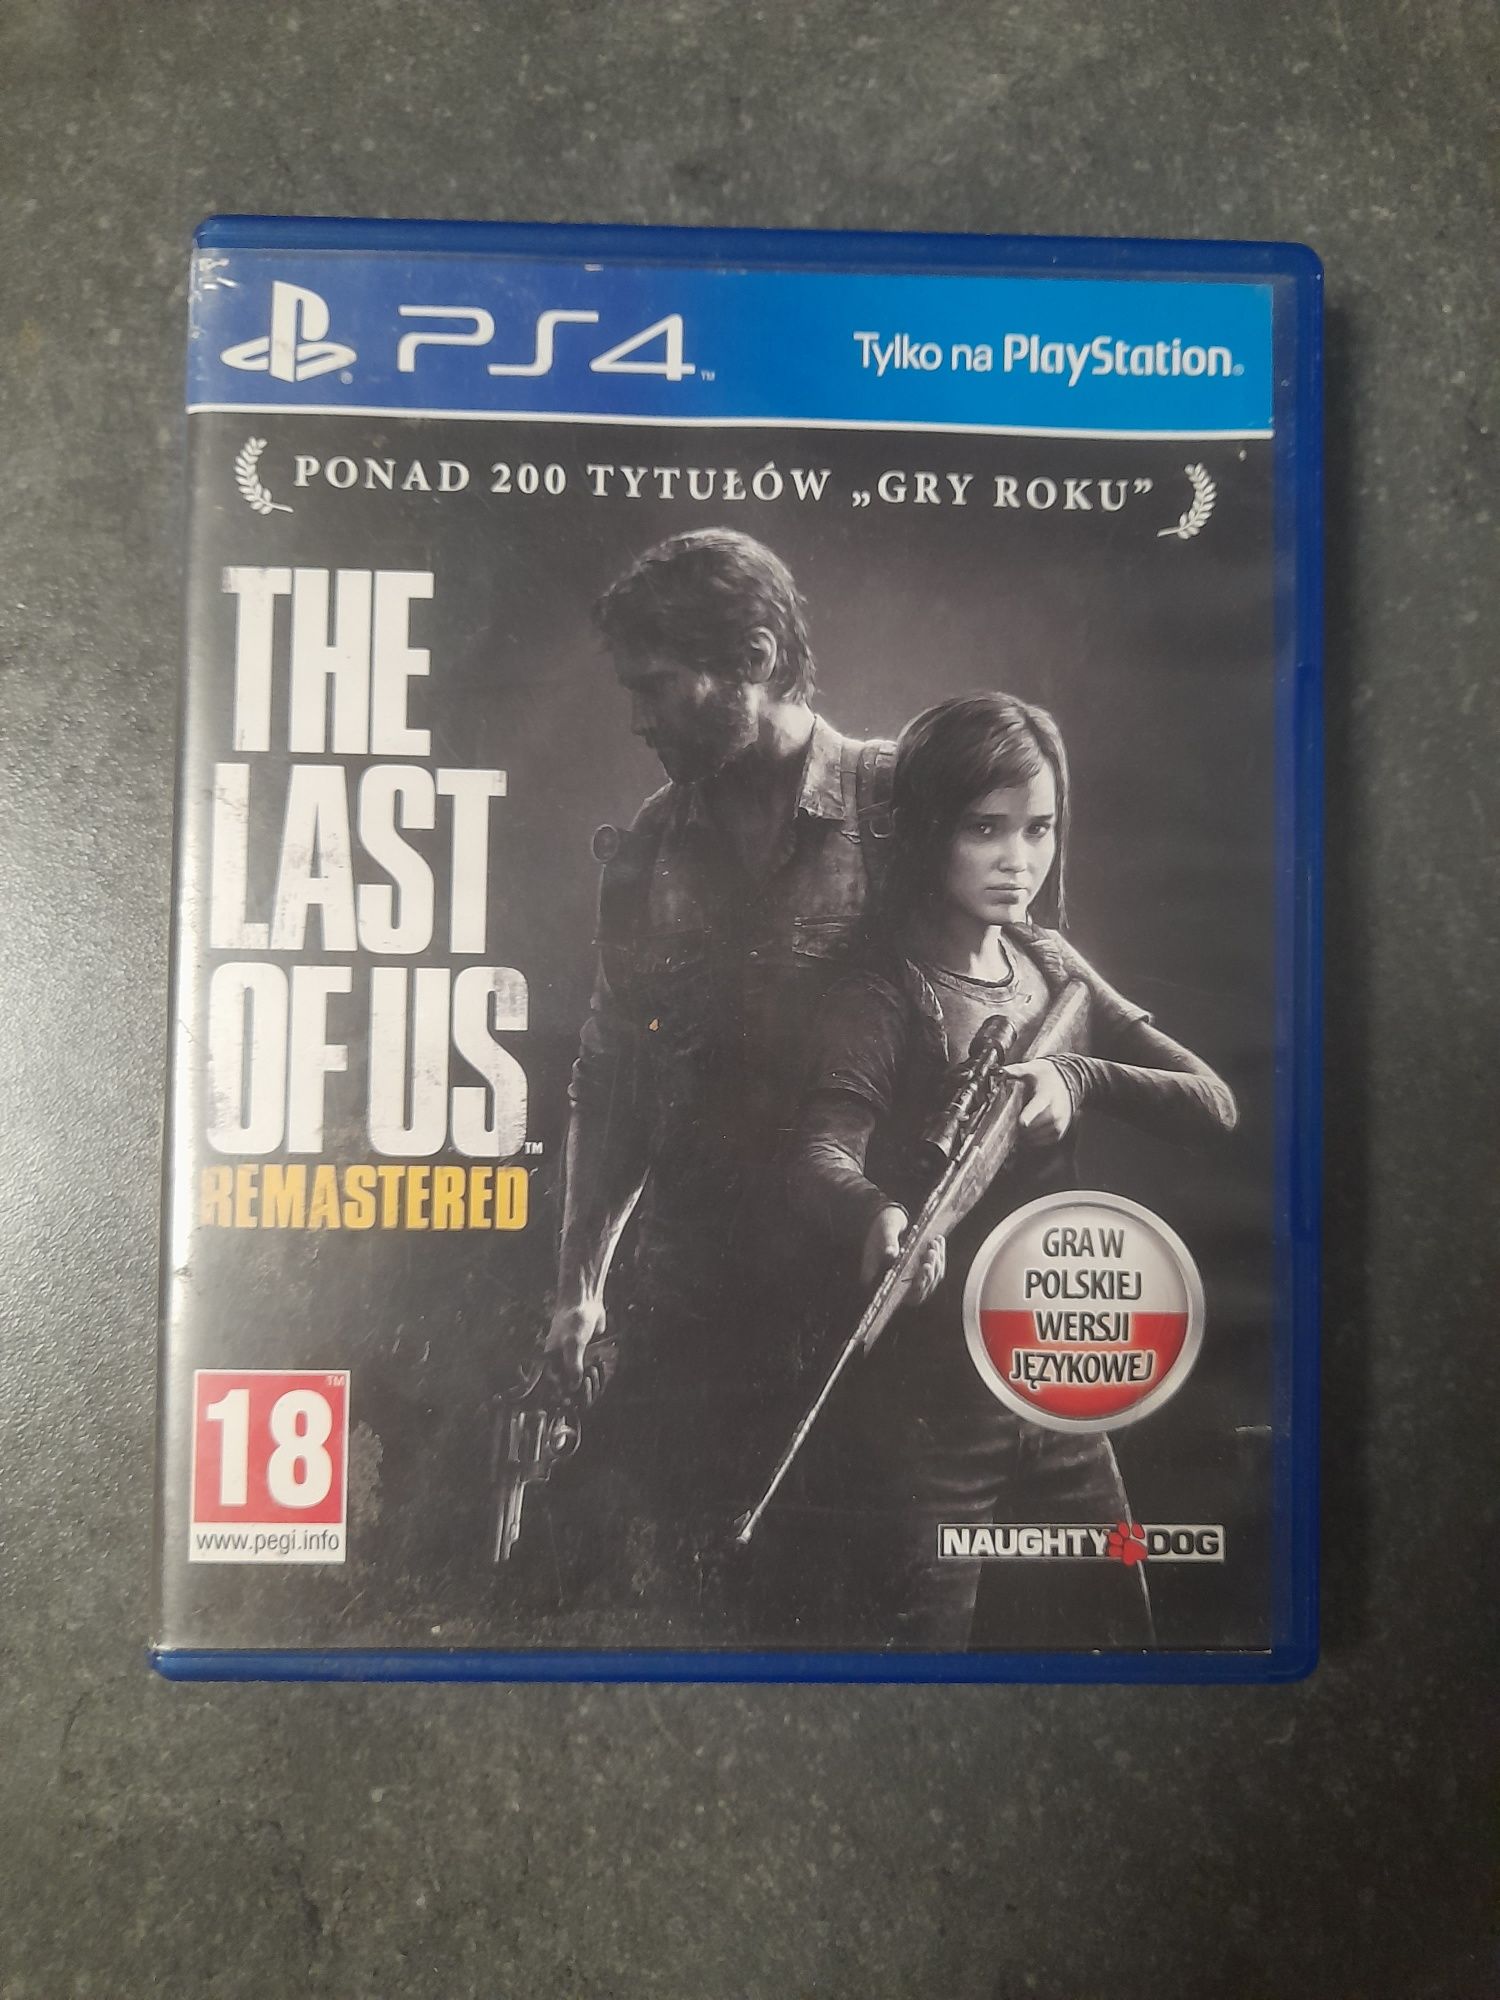 The Last Of Us remastered